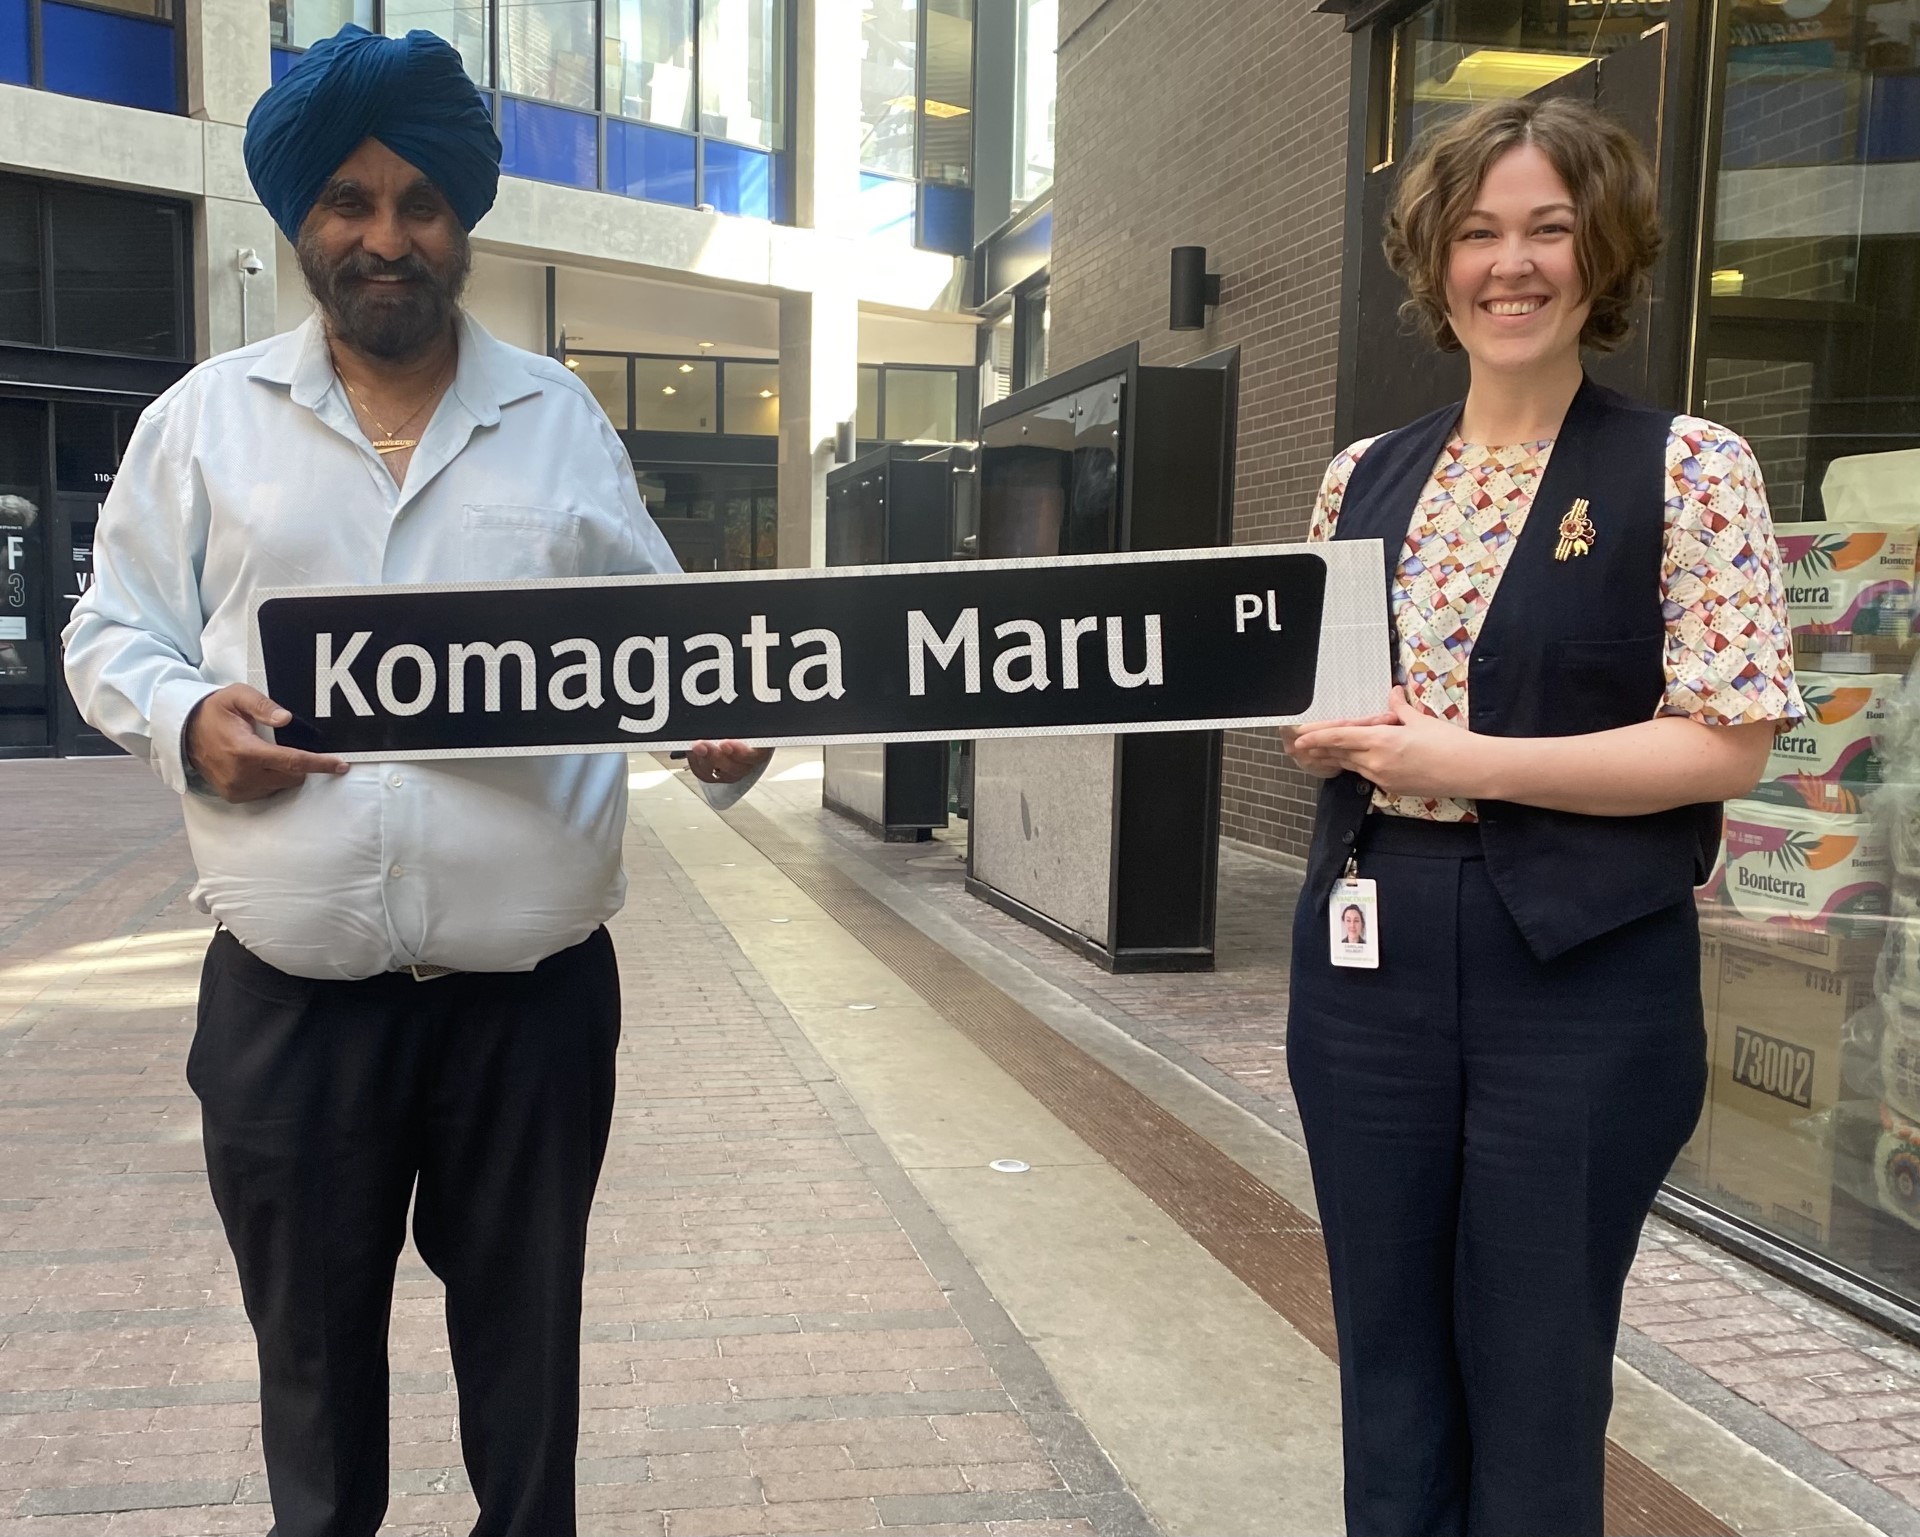 Komagata Maru Place Street Sign Presented To Raj Toor For Five Years Of Advocacy For Recognition